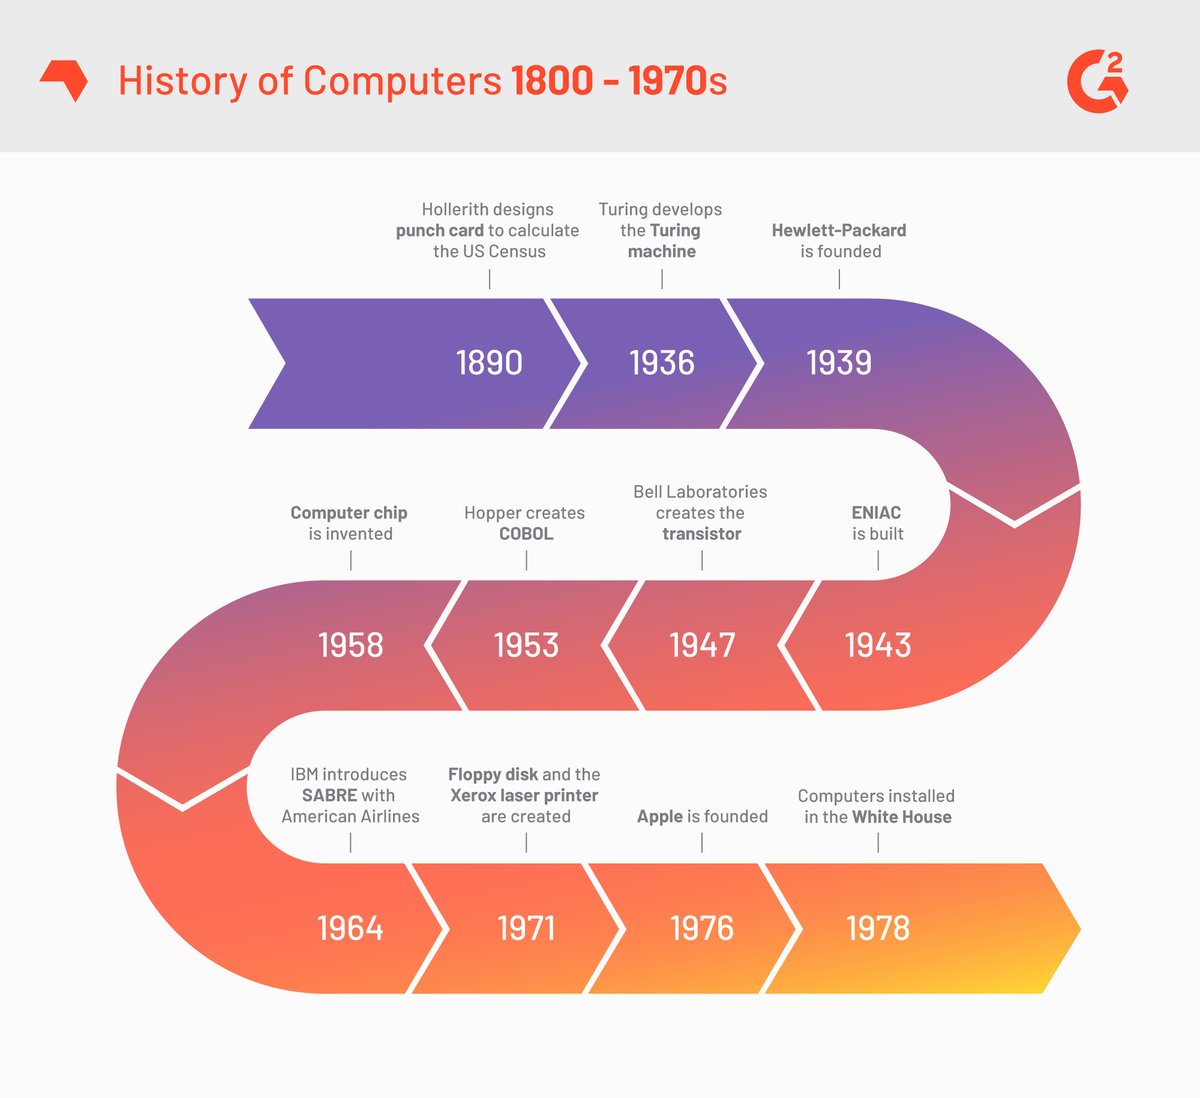 presentation about computer history